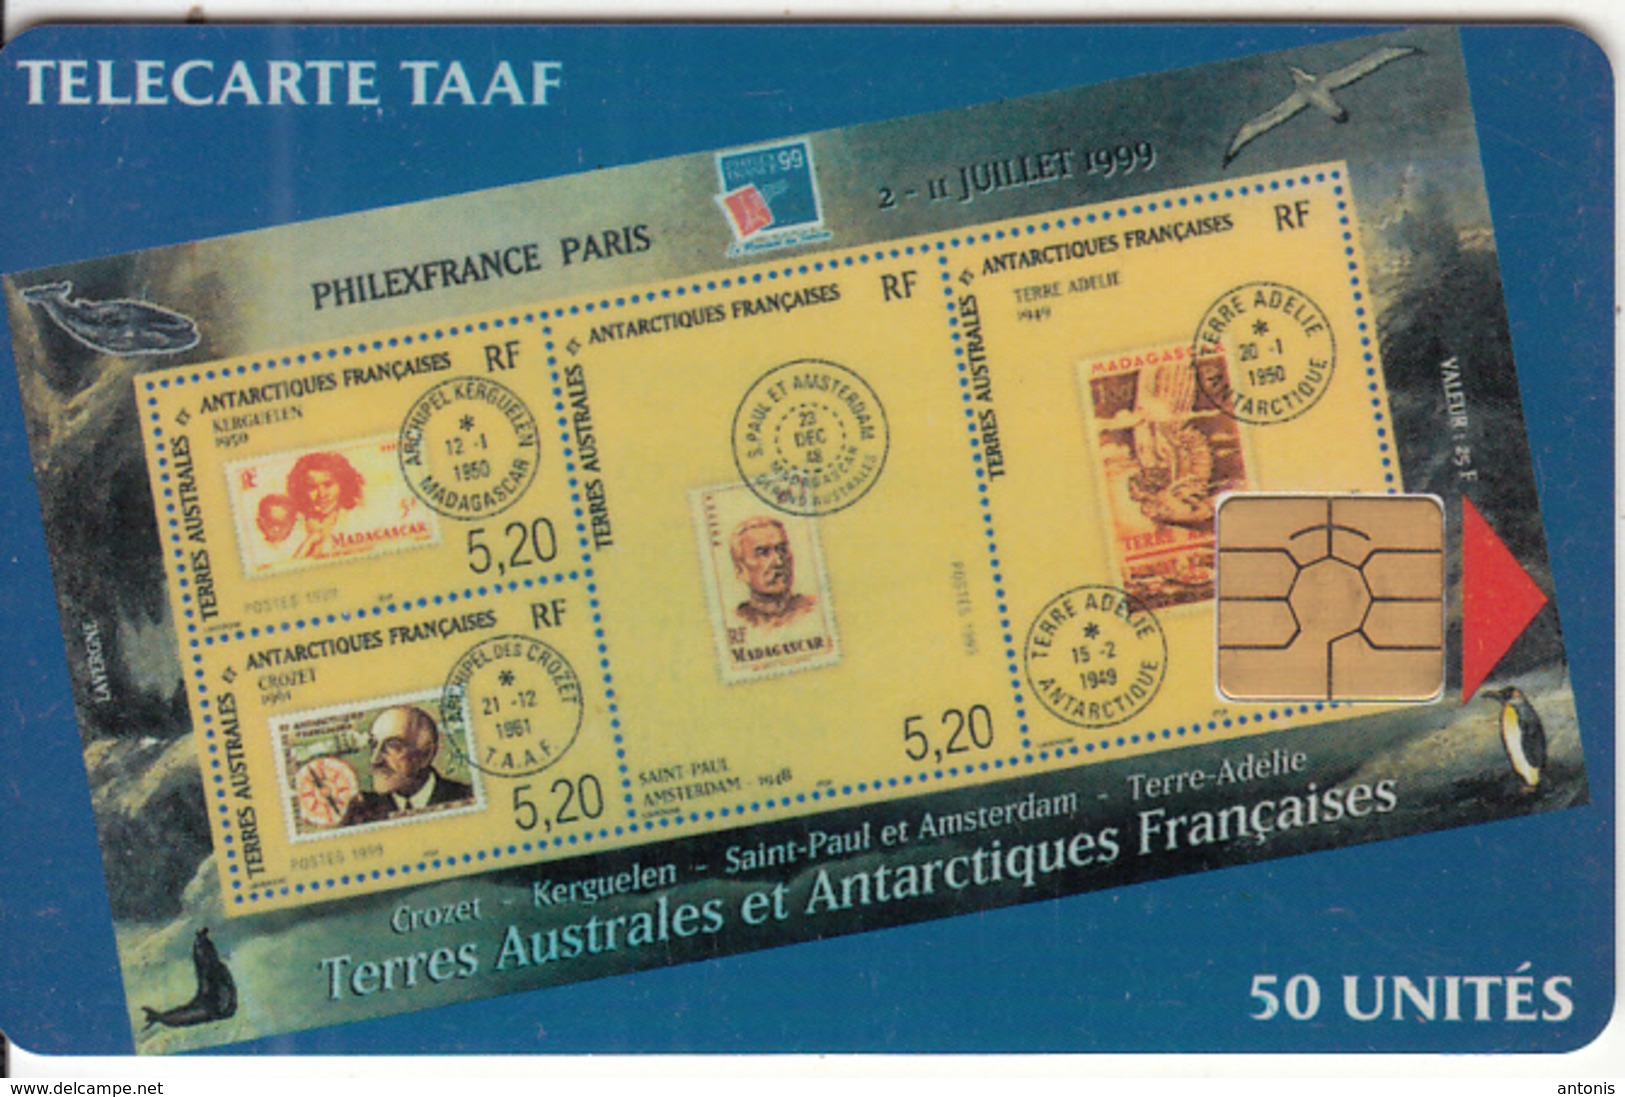 TAAF - Philex France 99(verdatre), Tirage %1500, 07/99, Used - TAAF - French Southern And Antarctic Lands